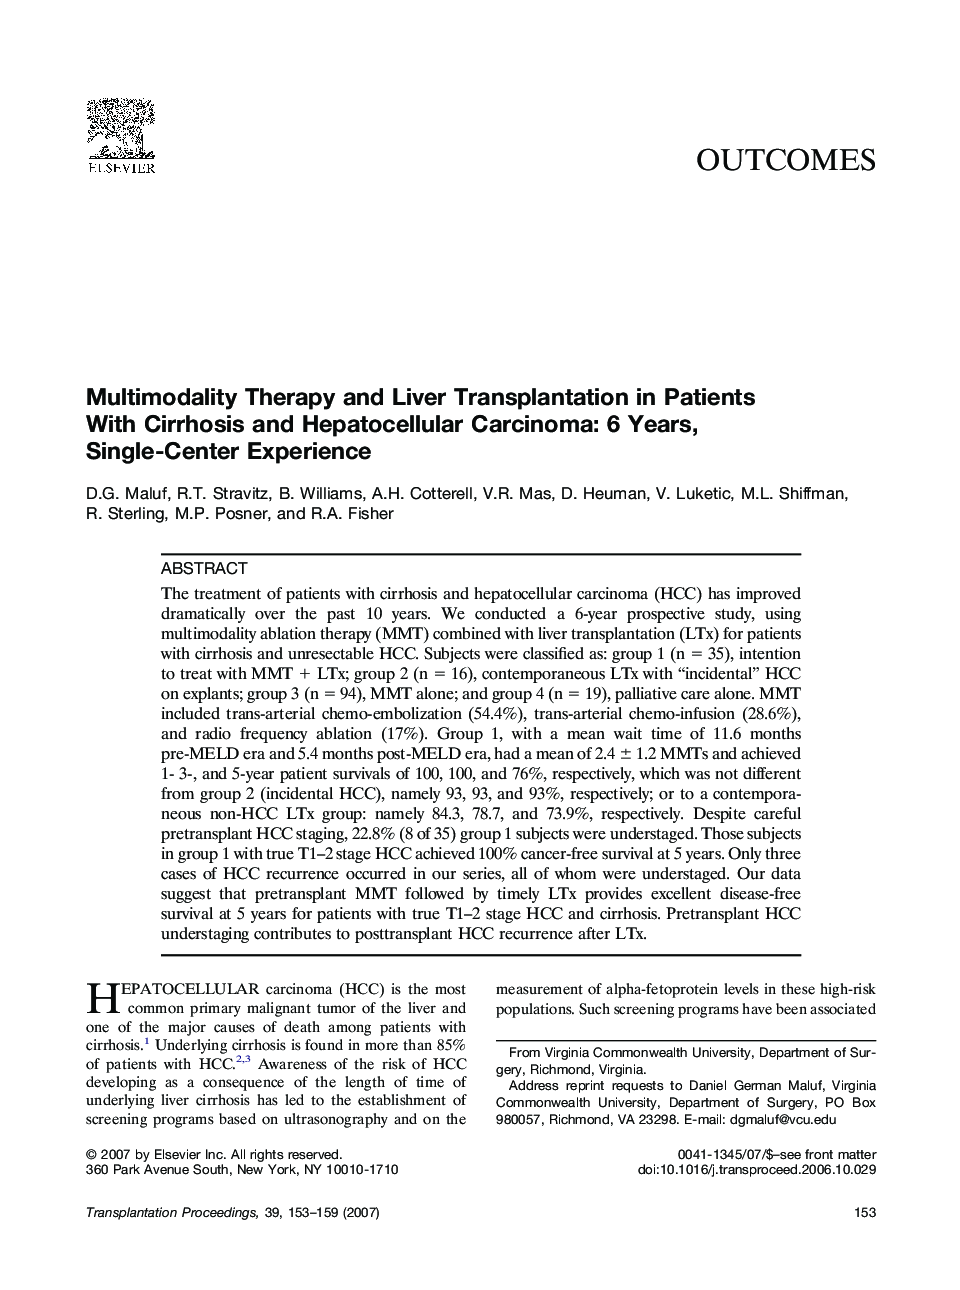 Multimodality Therapy and Liver Transplantation in Patients With Cirrhosis and Hepatocellular Carcinoma: 6 Years, Single-Center Experience